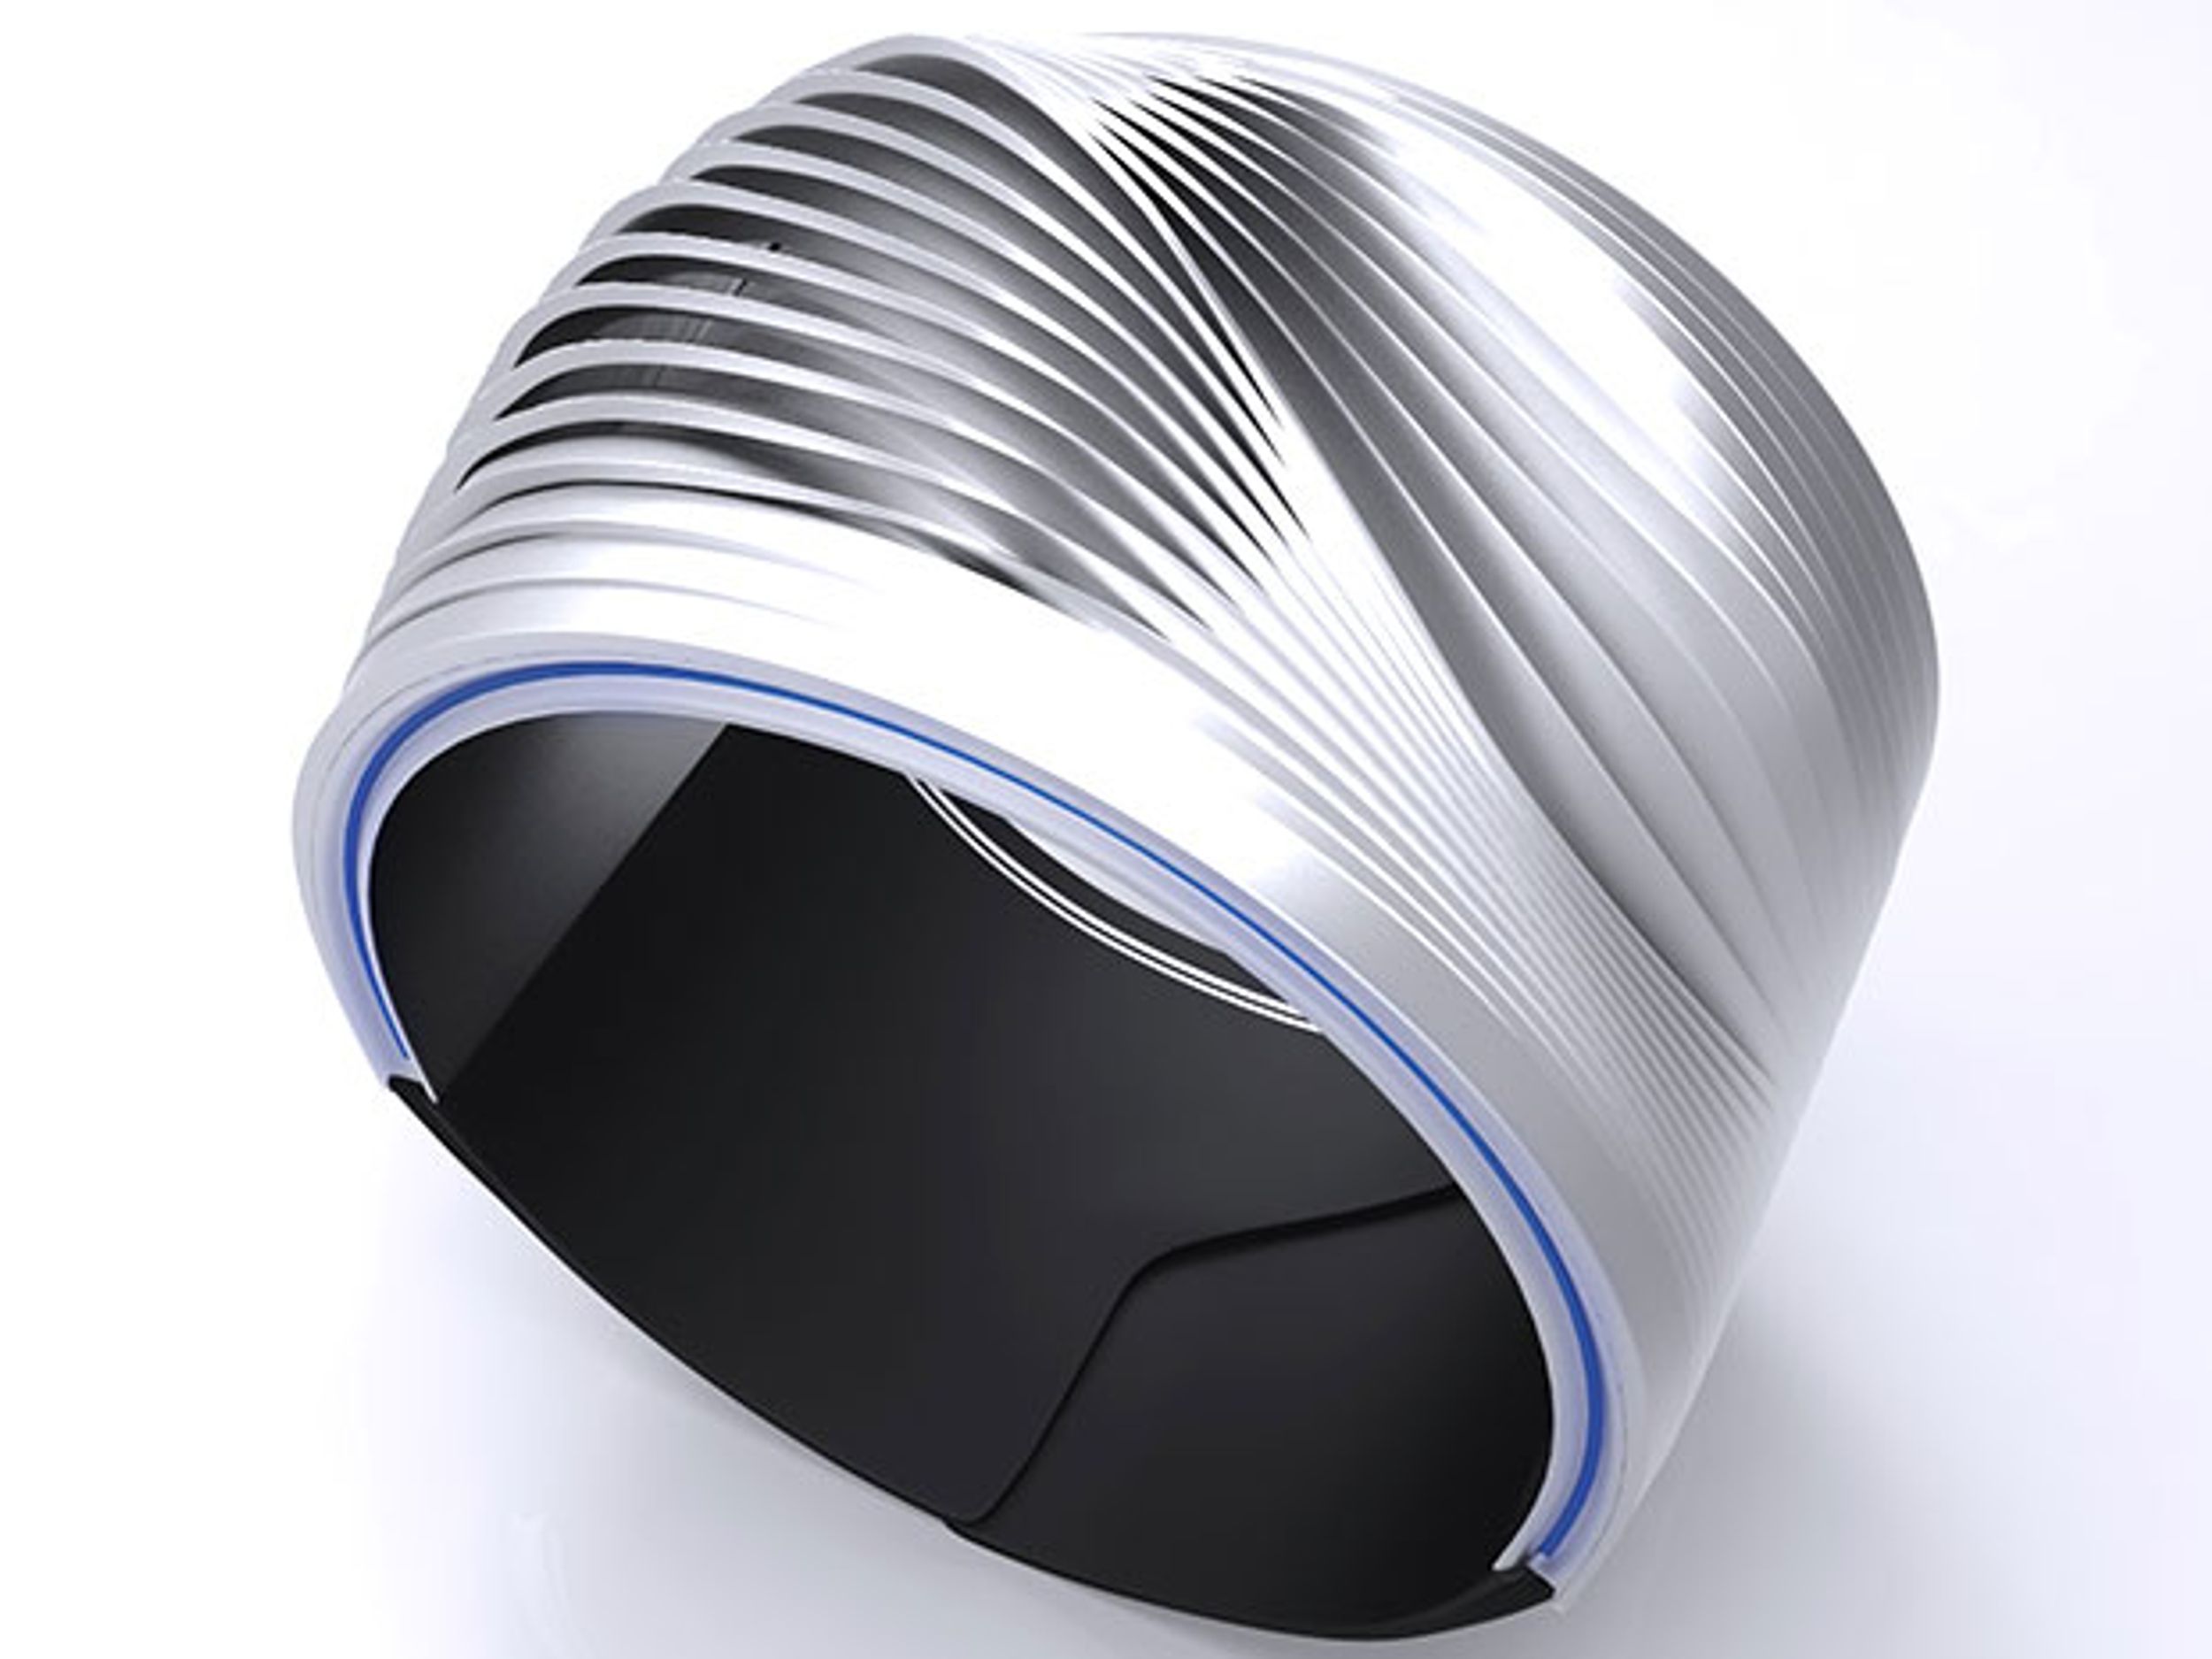 An artist's rendering of EMBR Labs' thermoelectric wearable by Italian designer Niccolo Casas.